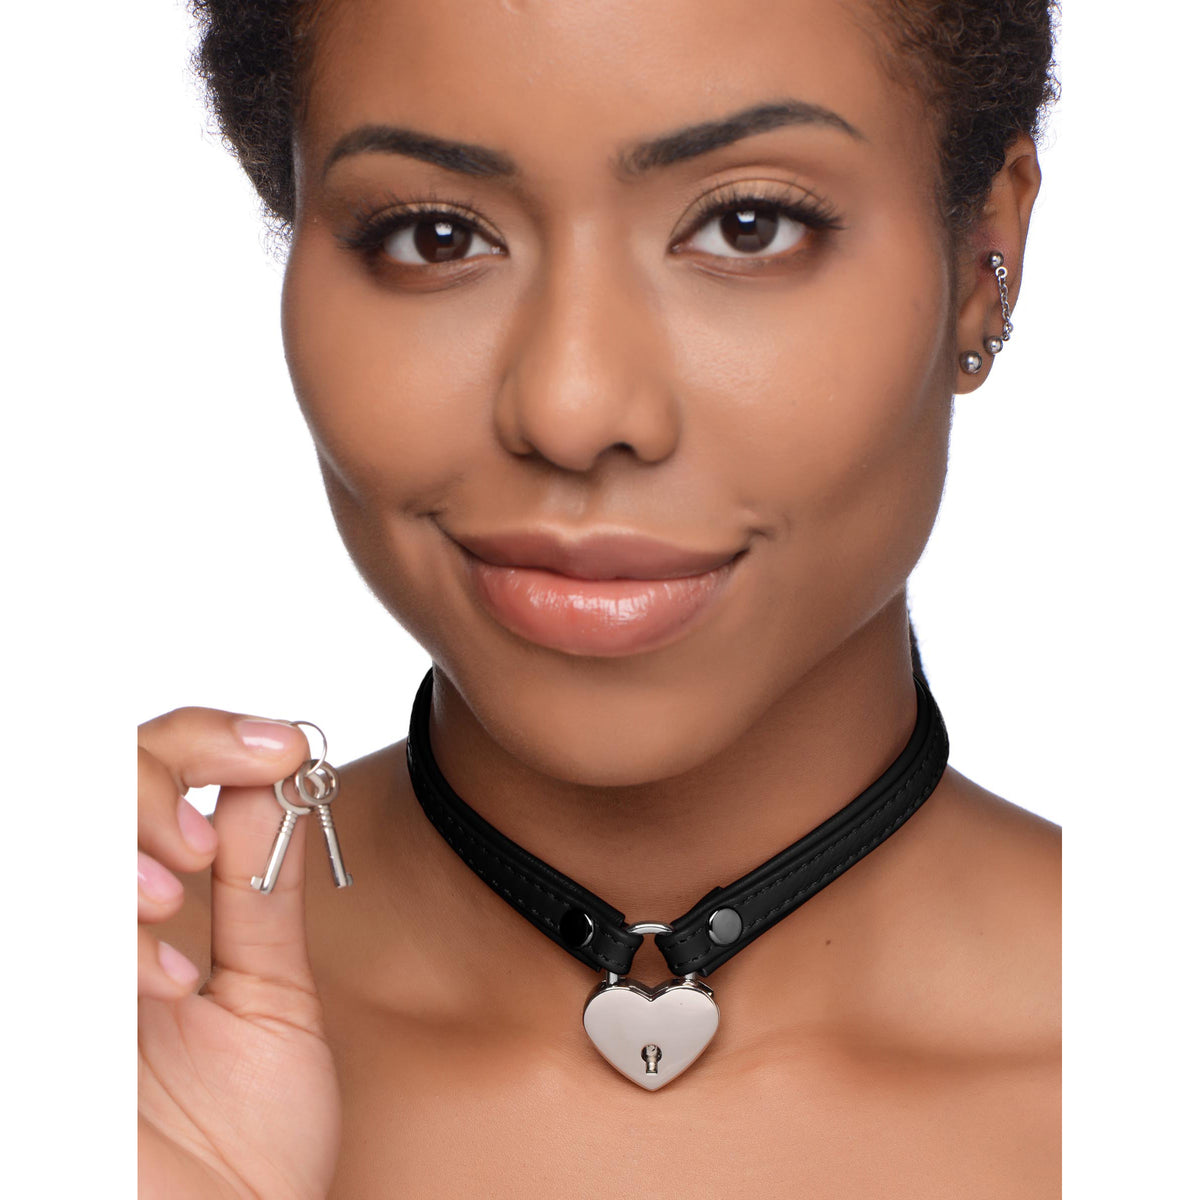 Heart Lock Leather Choker with Lock and Key - Black